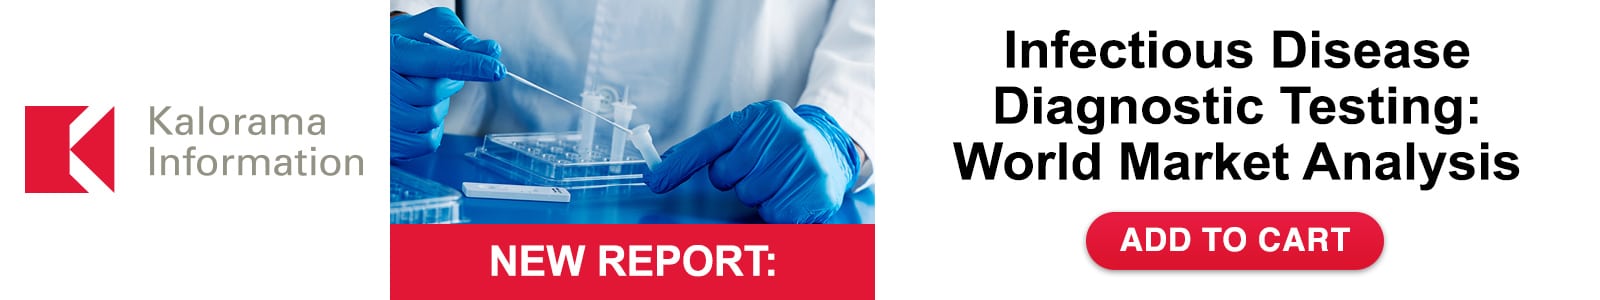 Infectious Disease Report